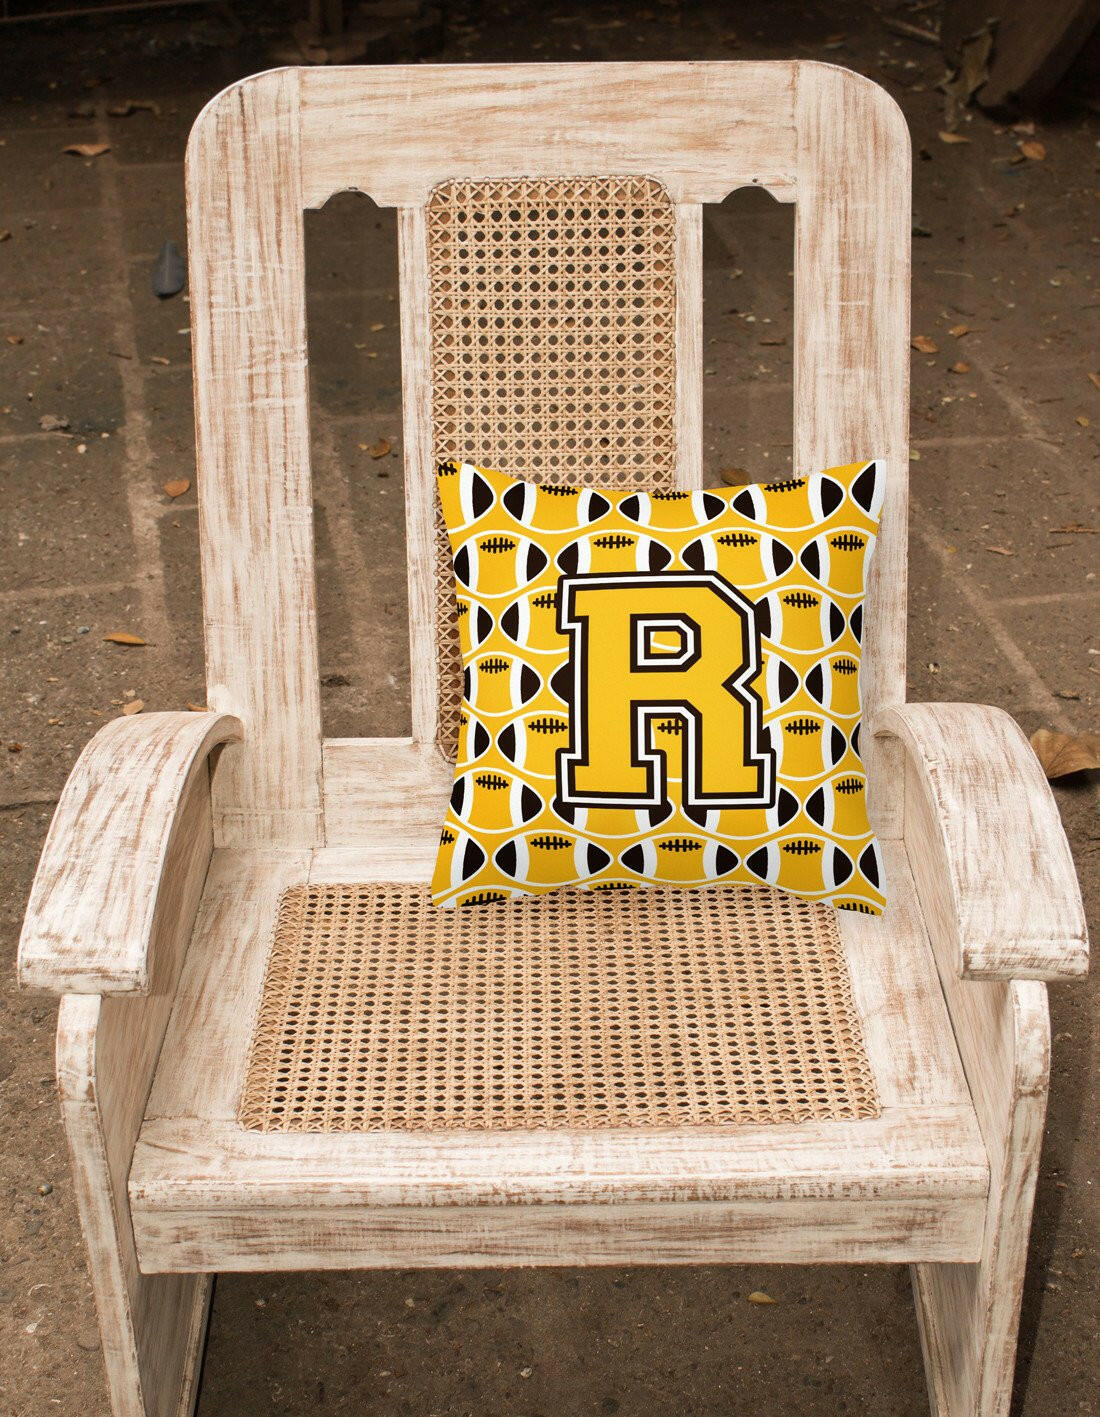 Letter R Football Black, Old Gold and White Fabric Decorative Pillow CJ1080-RPW1414 by Caroline's Treasures